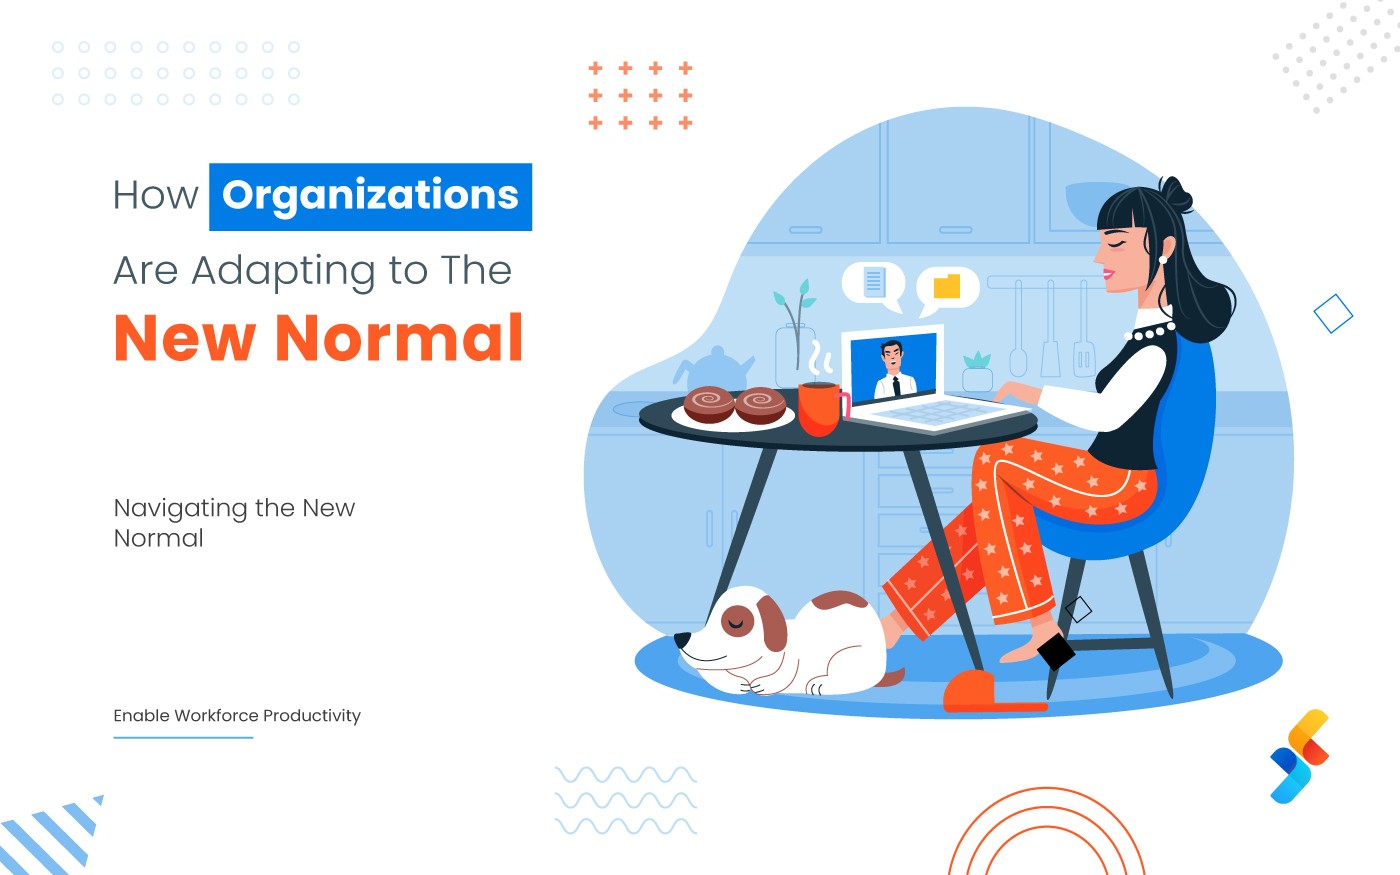 Work From Home: How Organizations Are Adapting to The New Normal